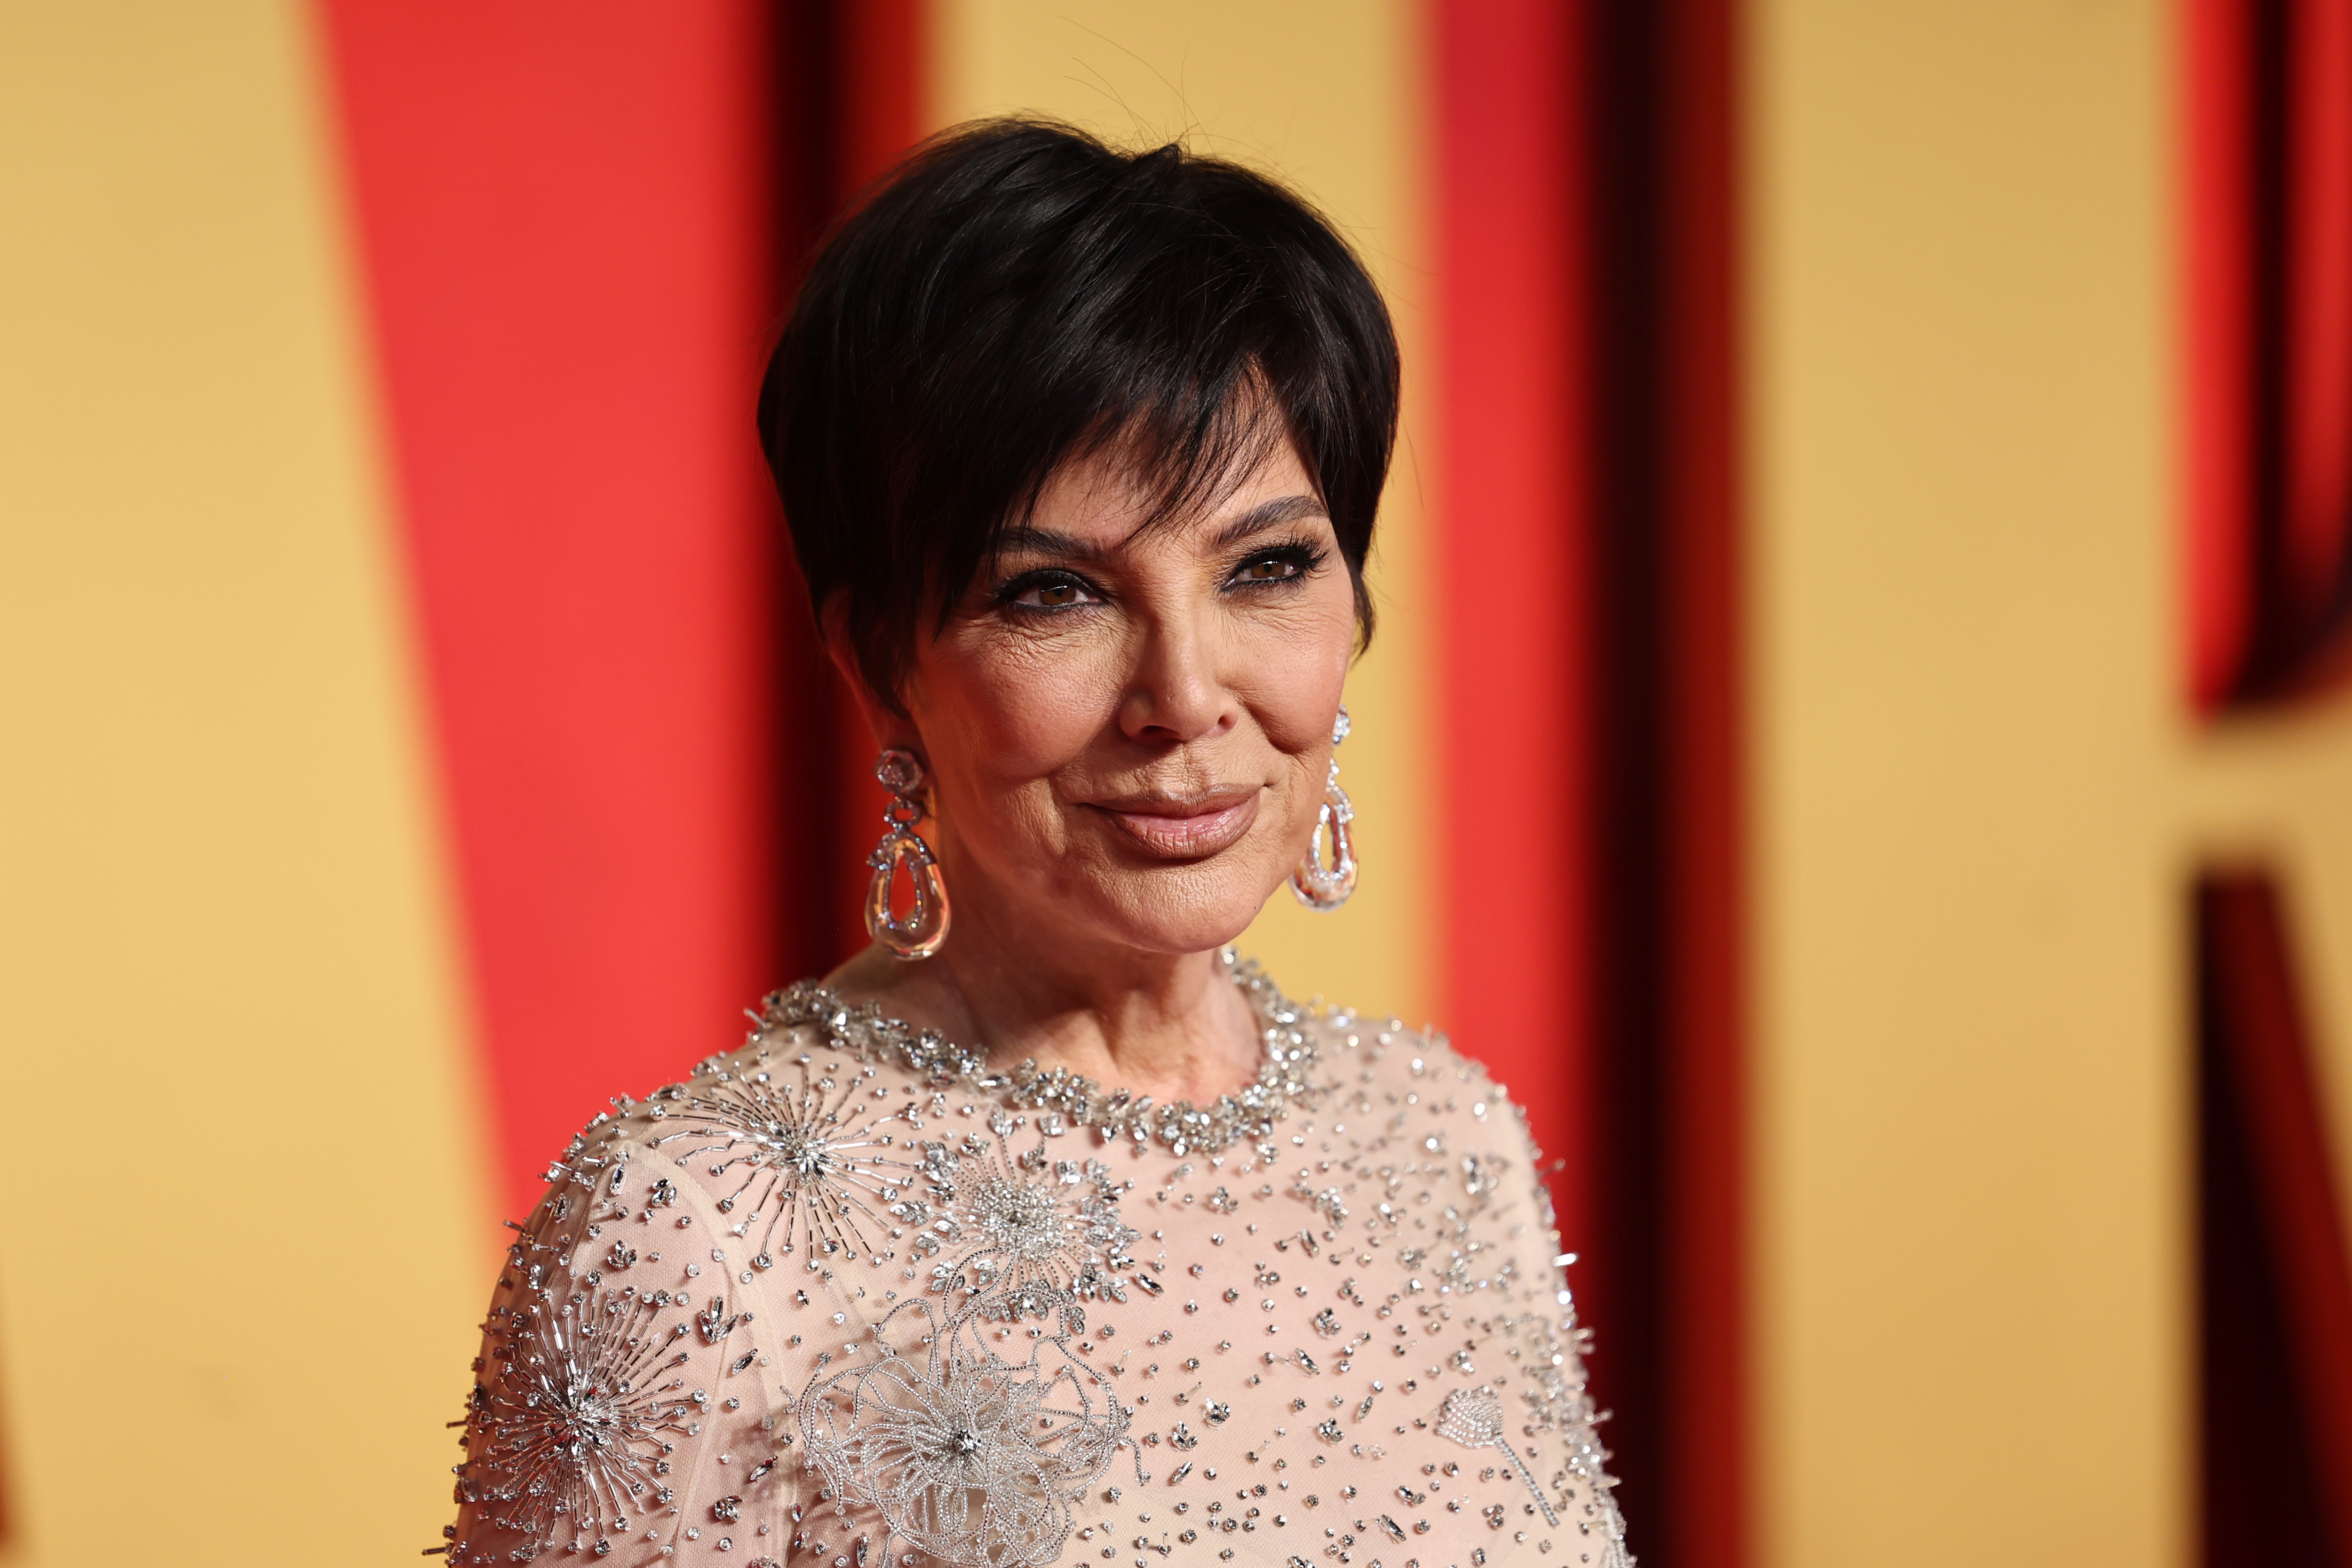 Kris Jenner undergoes surgery after ovary tumor diagnosis